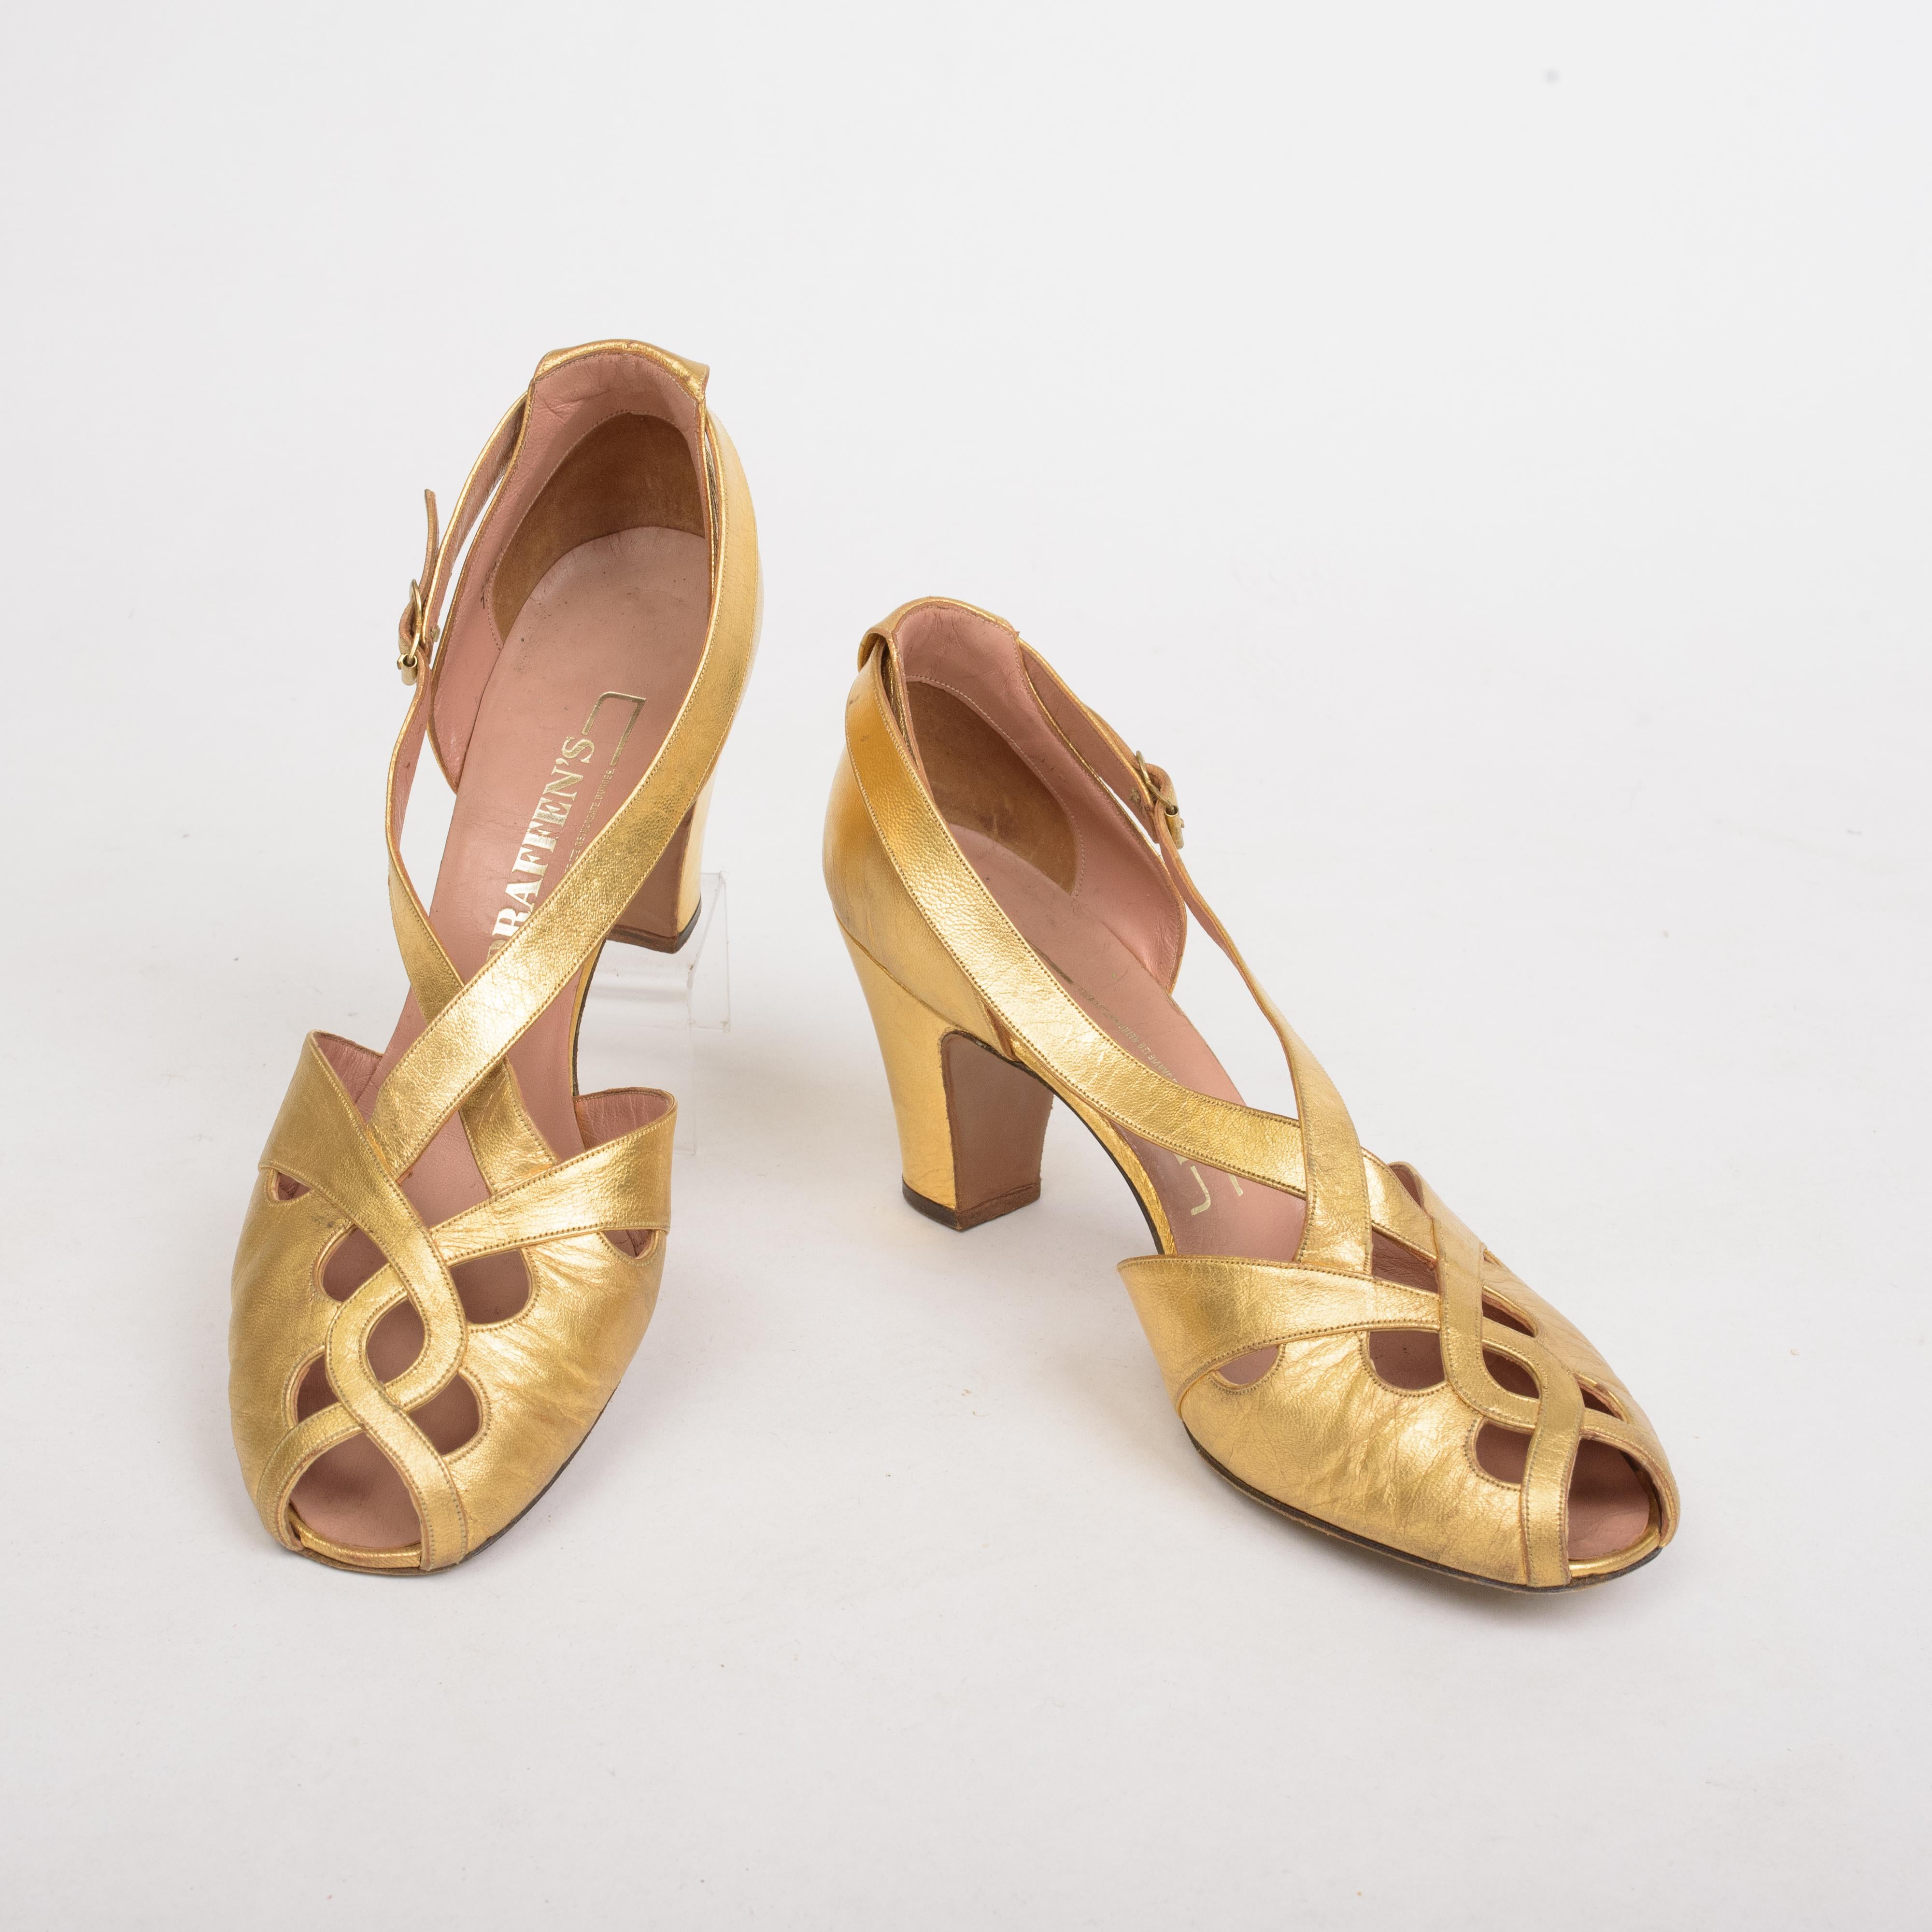 Women's Pairs of ballroom shoes - Salomés in golden leather Circa 1930/1940